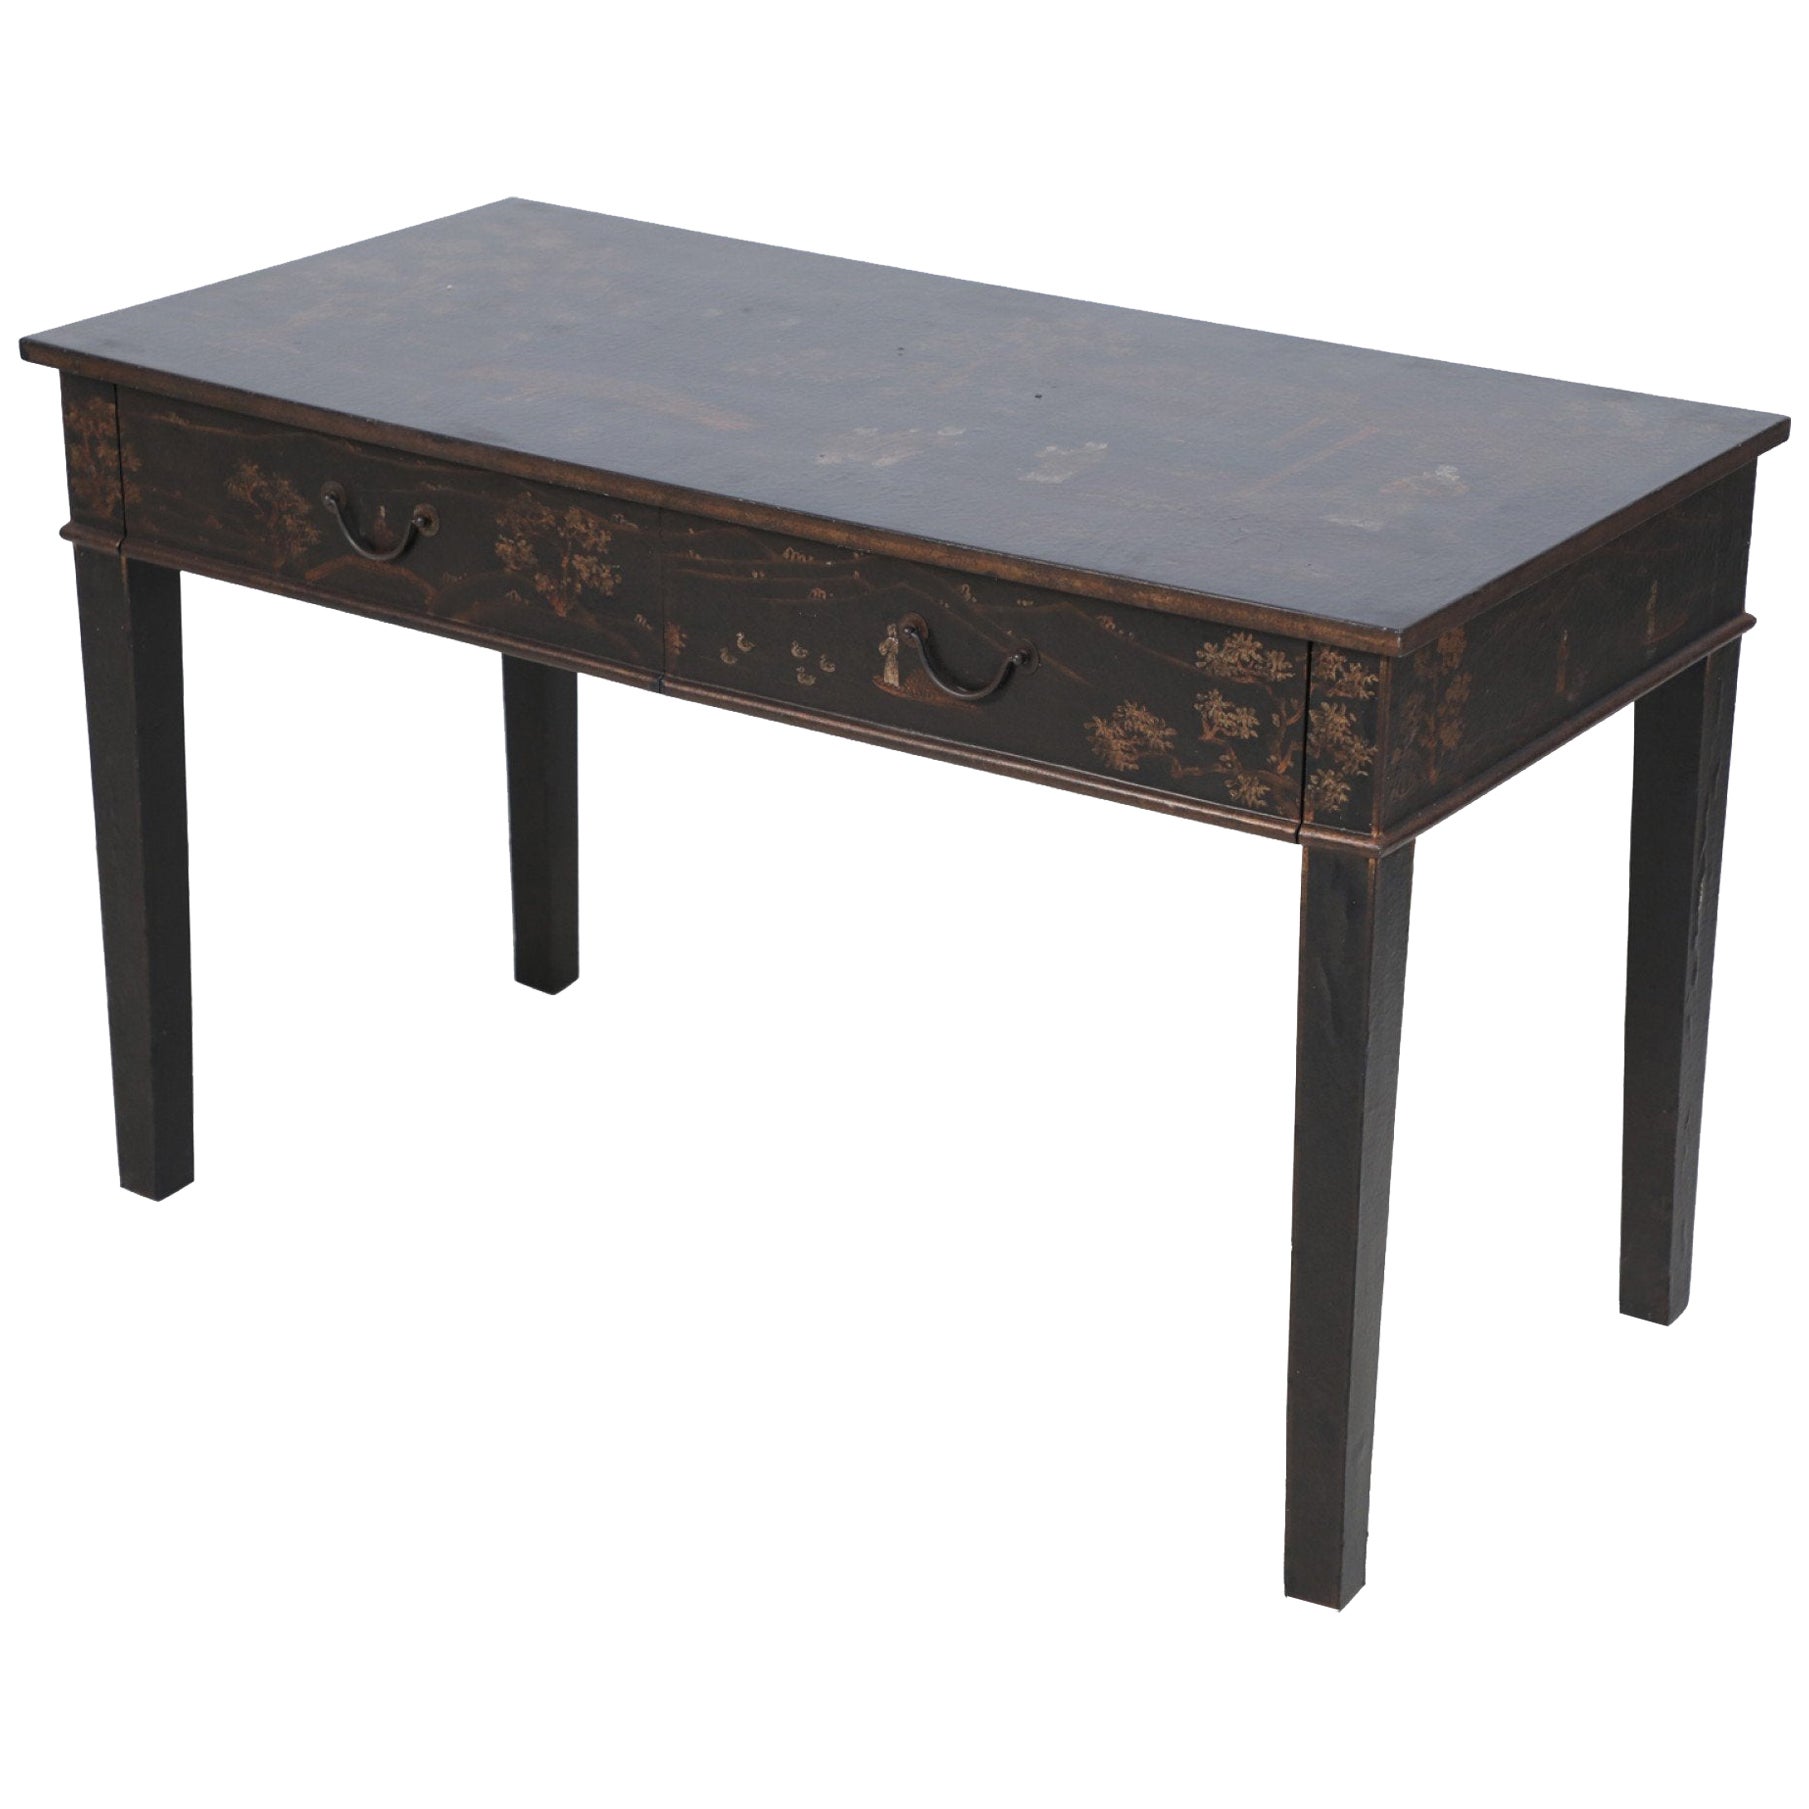 Chinese Black and Painted Pastoral Scene Writing Desk